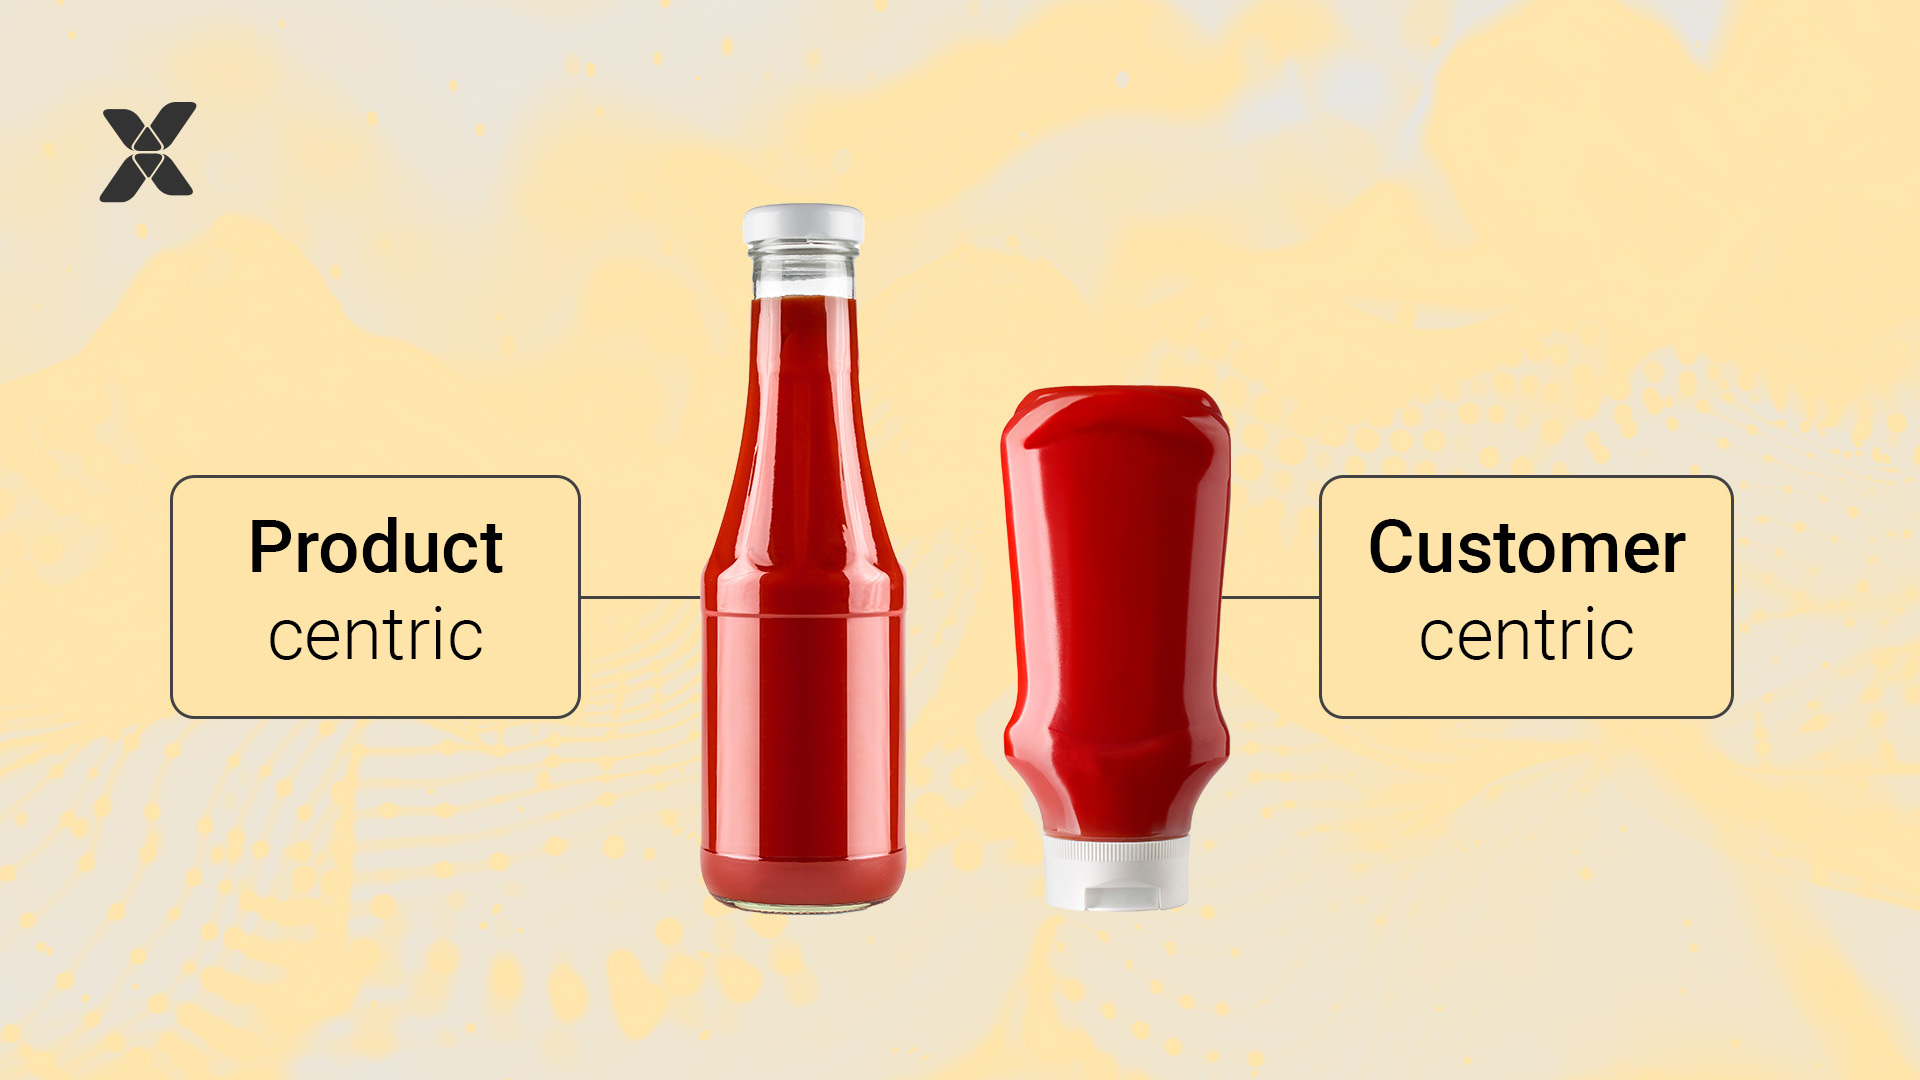 two ketchup bottles, one representing a product centric approach and the other representing a customer centric approach